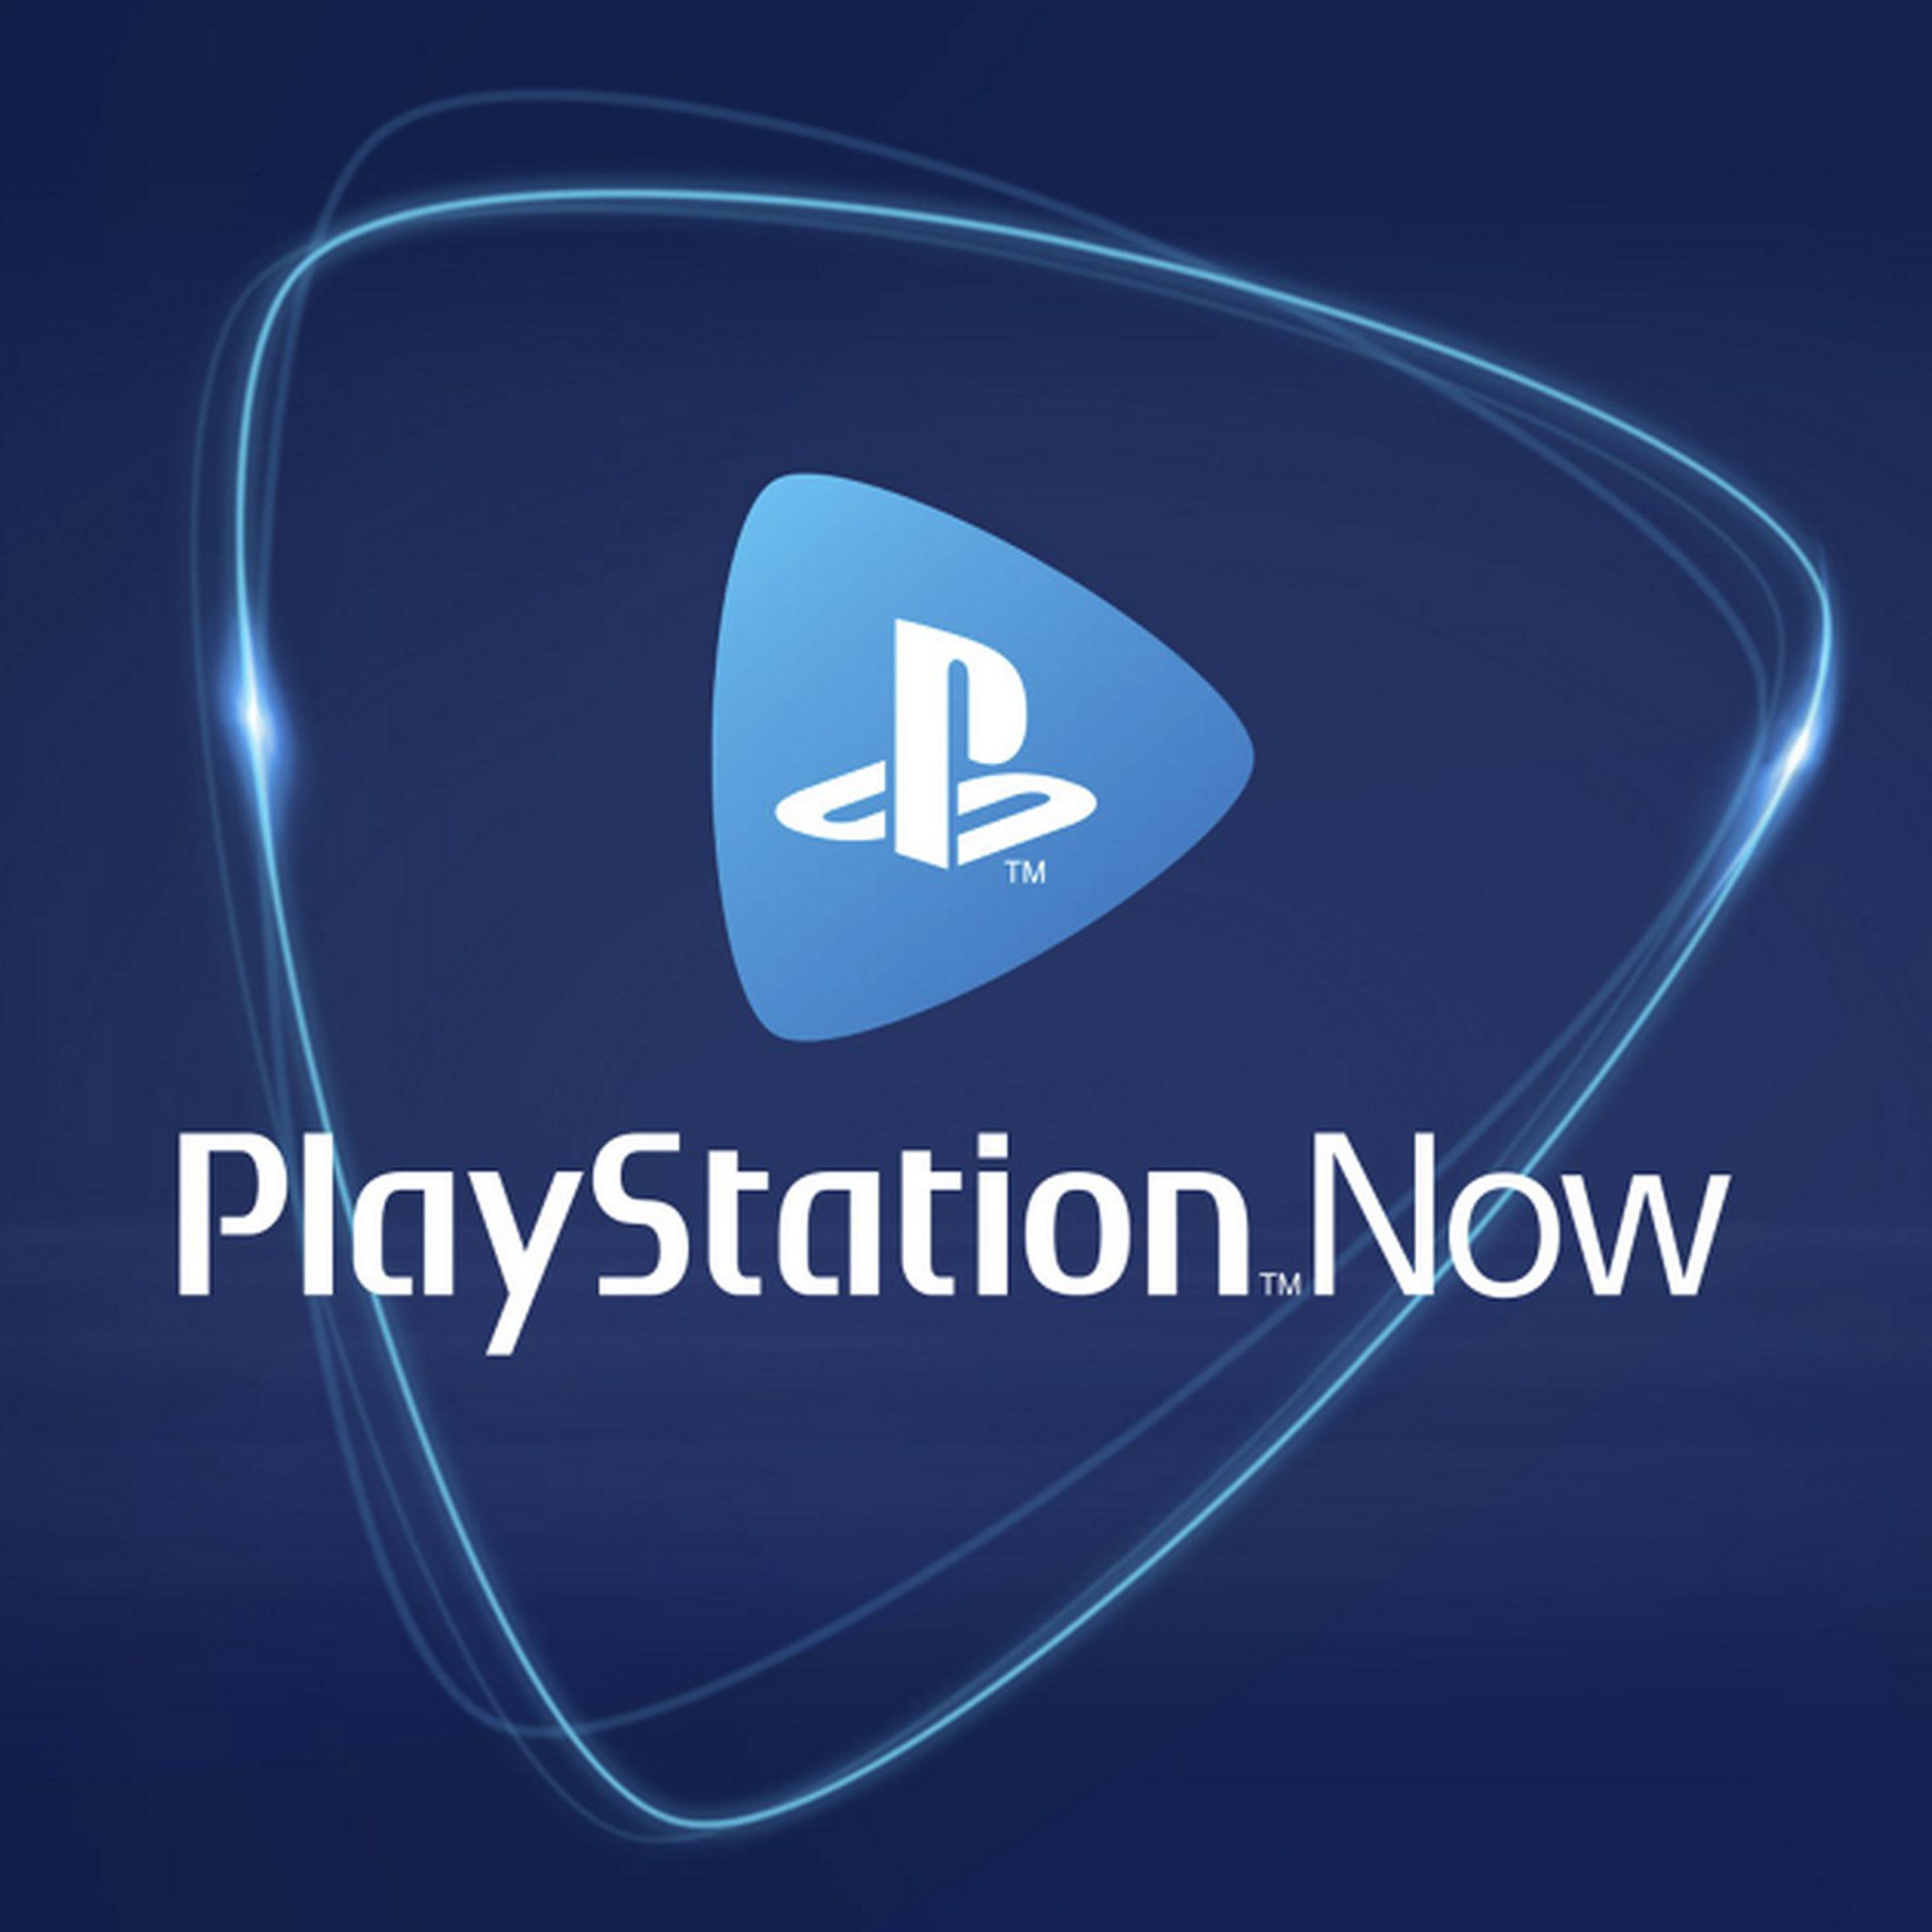 The logo for PlayStation Now,